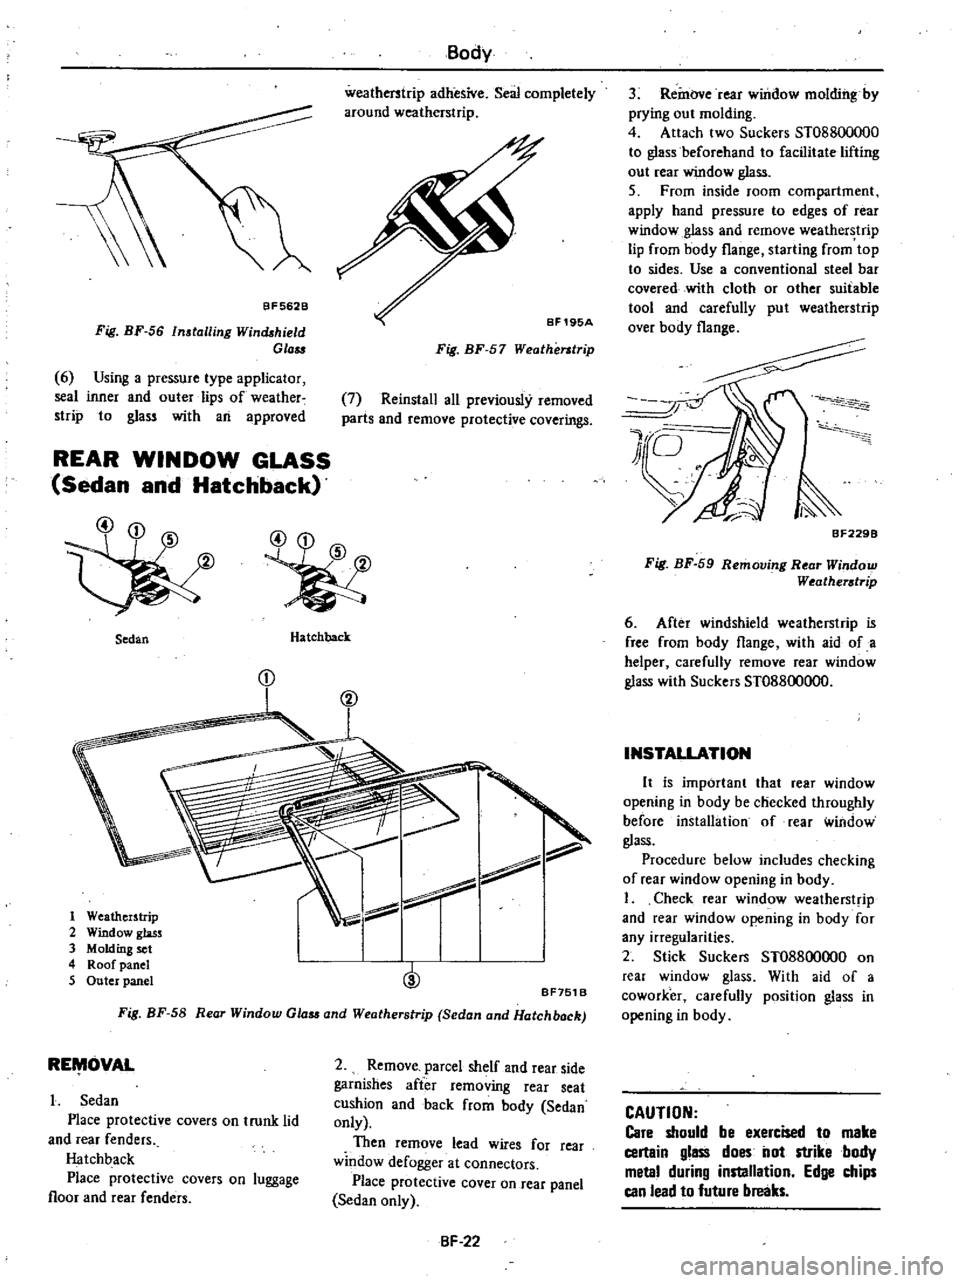 DATSUN 210 1979  Service Manual 
BF562B

Fig 
BF 
56

Installing 
Winchhield

Gla

6

Using 
a

pressure

type 
applicator

seal 
inner

and 
outer

lips 
of 
weather

strip 
to

glass 
with 
an

approved

REAR 
WINDOW

GLASS

Sedan